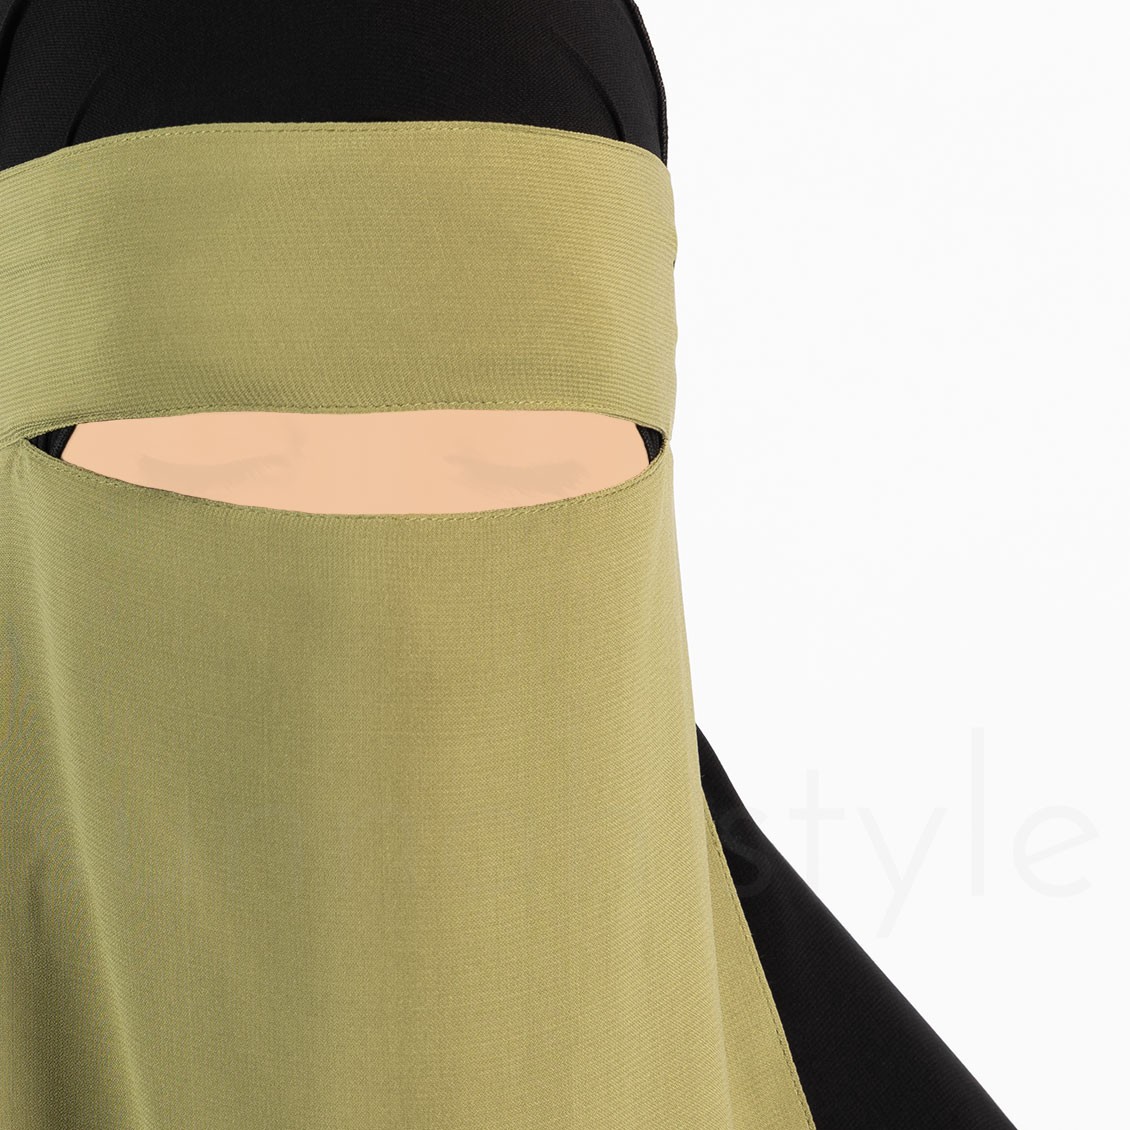 Sunnah Style One Layer One Piece Niqab Moss